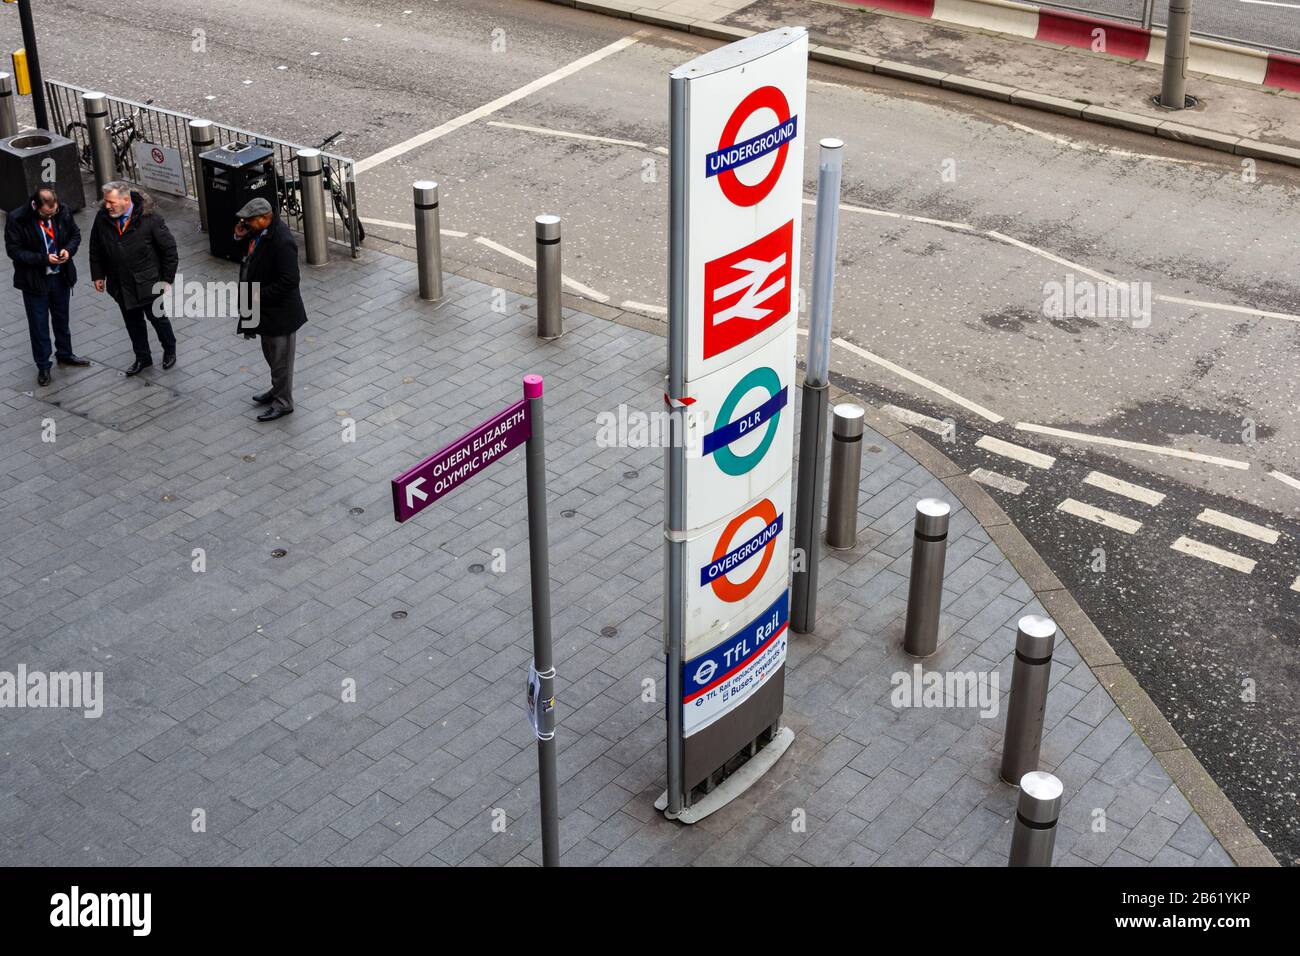 London, England, UK - January 17, 2020: A totem sign on a street outside Stratford Station avertises the Transport for London and National Rail transi Stock Photo